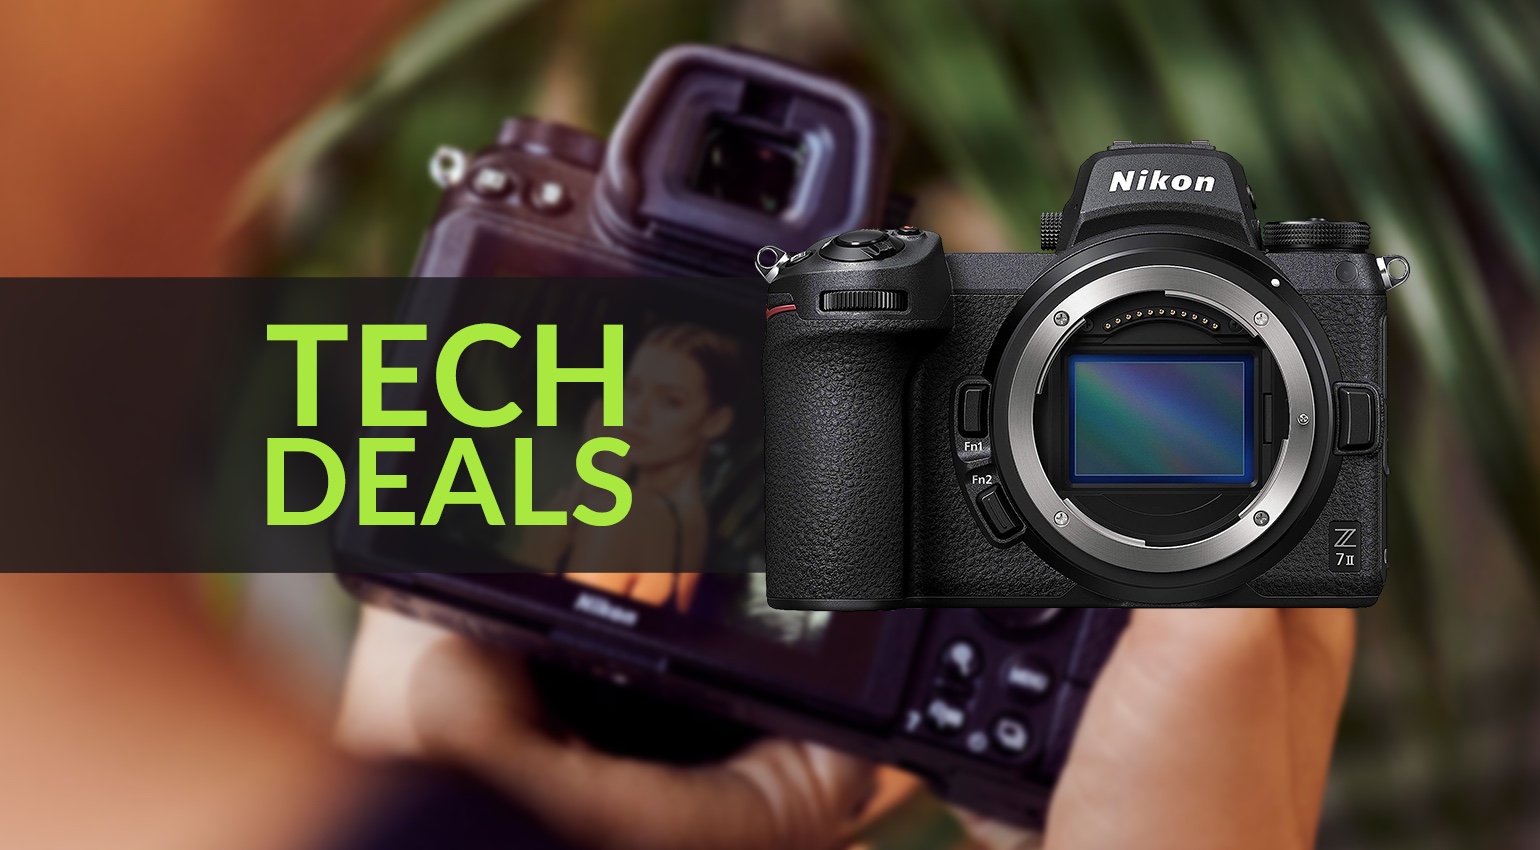 Tech Deals from Nikon, Sony, Corsair, and Lexar Professional